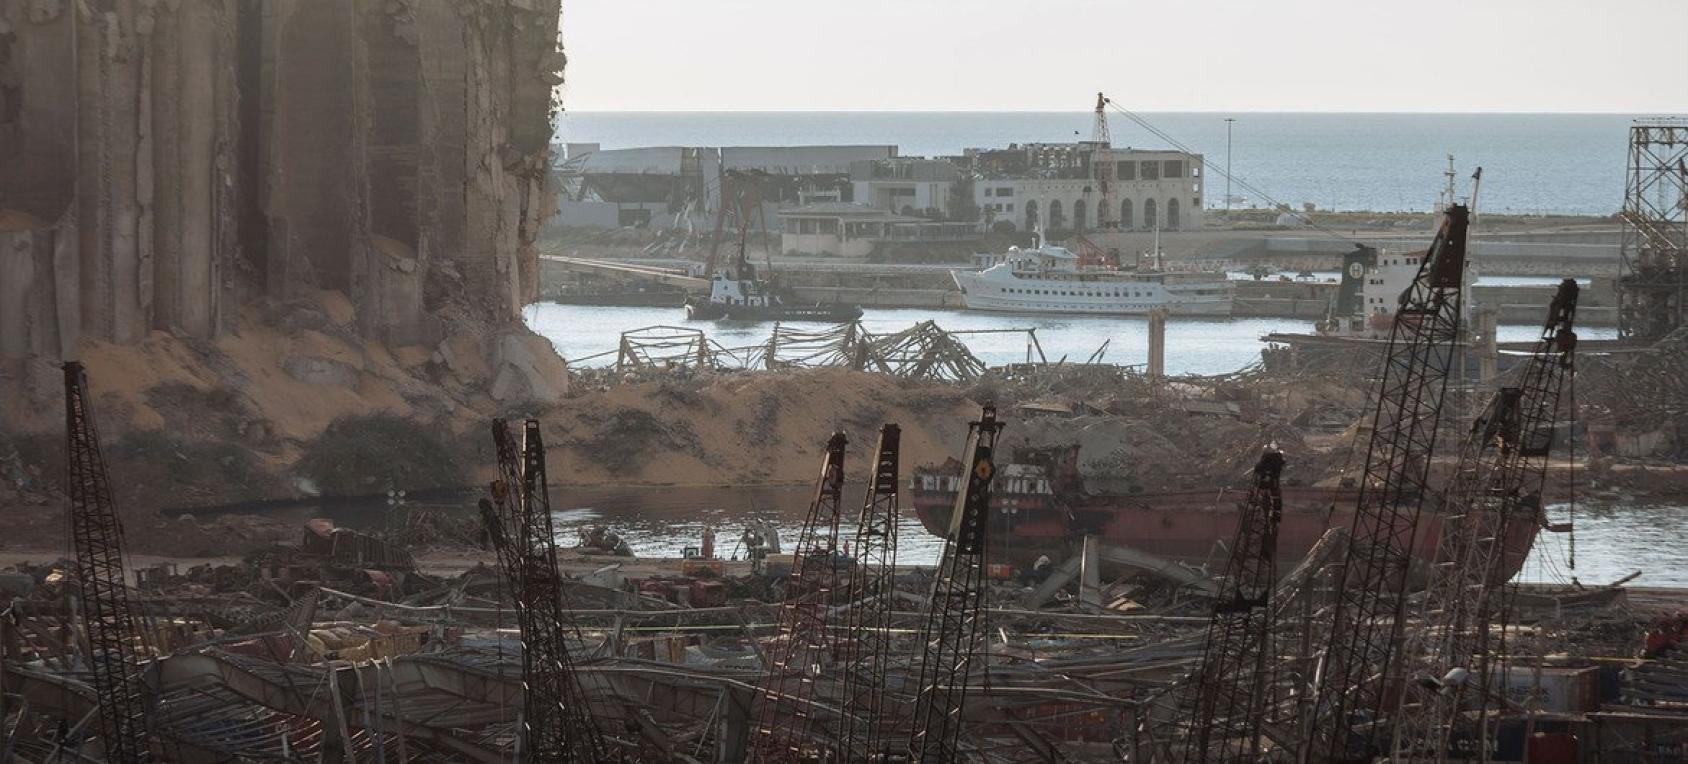 The view of the Port of Beirut after the August 4, 2020 explosion.